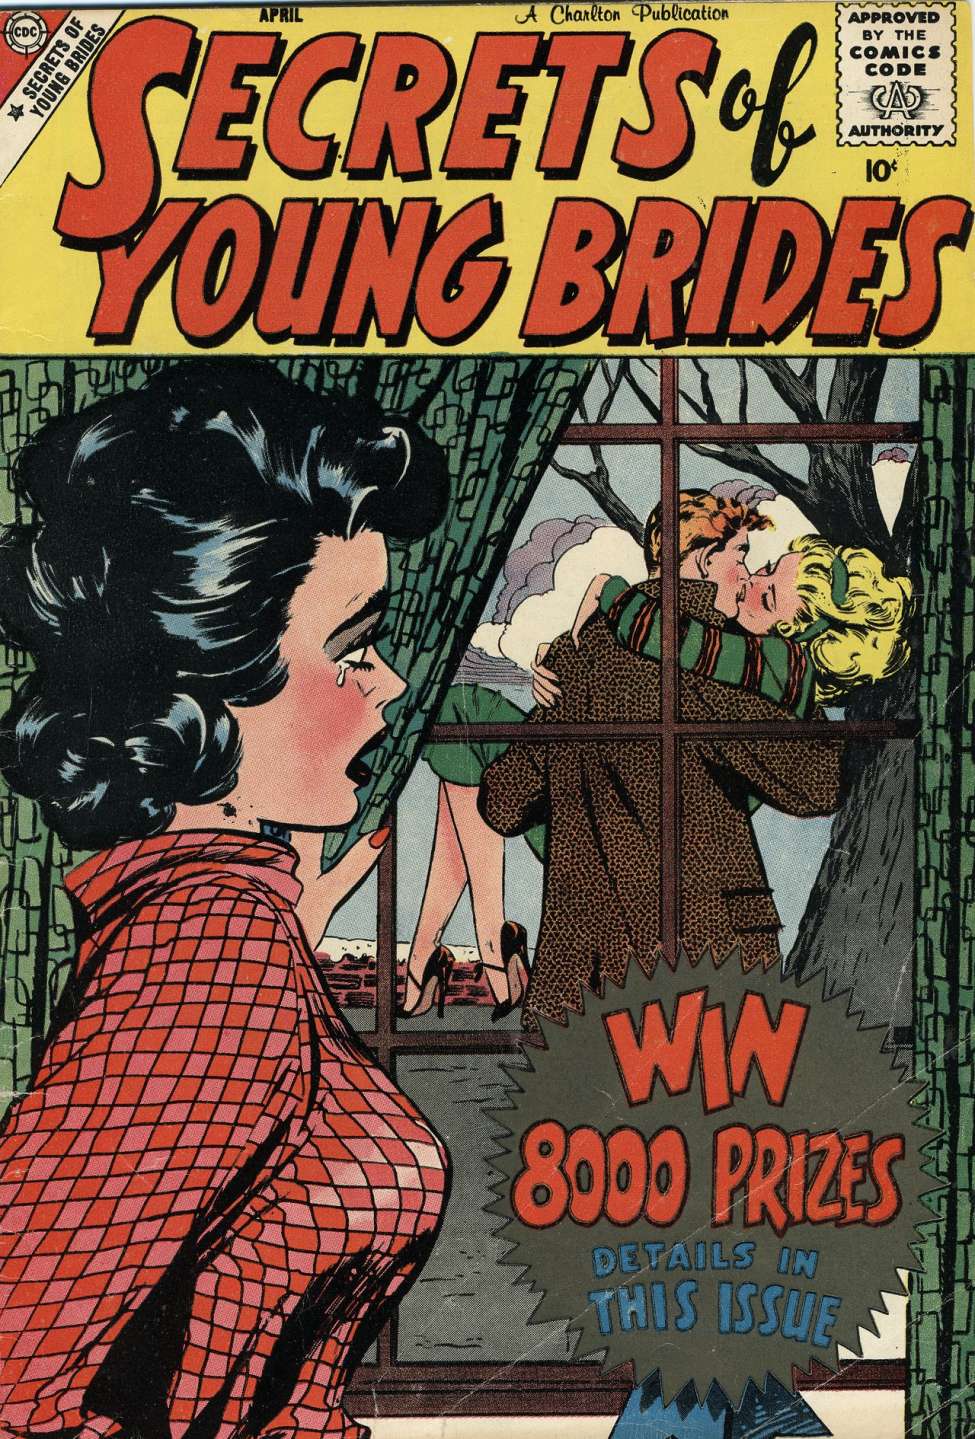 Book Cover For Secrets of Young Brides 13